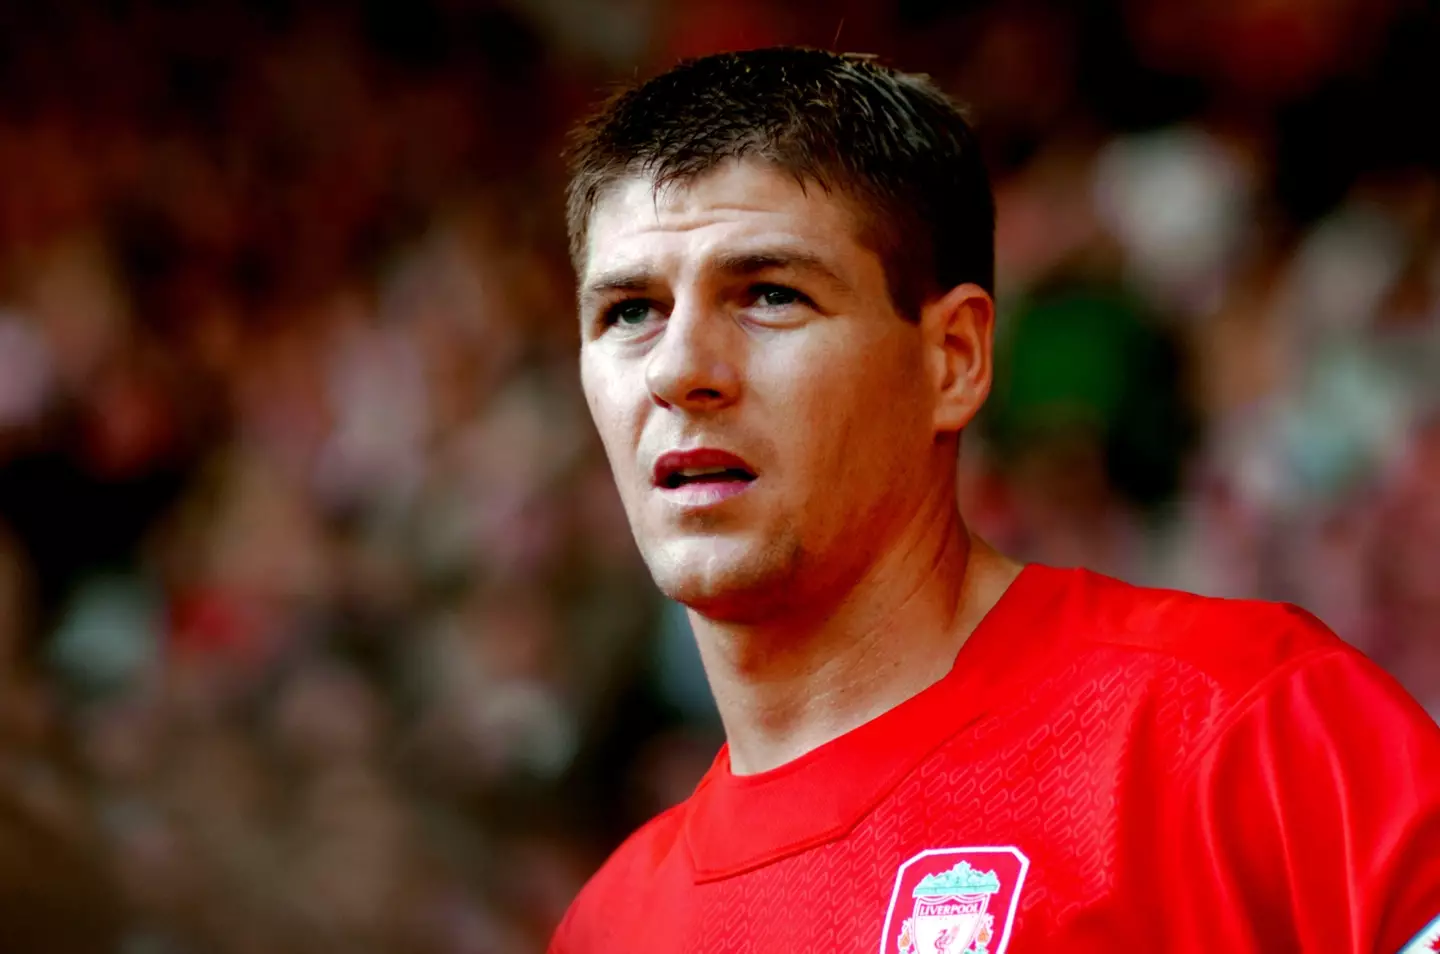 Richards named Gerrard as the best English player of the Premier League era (Image: PA)